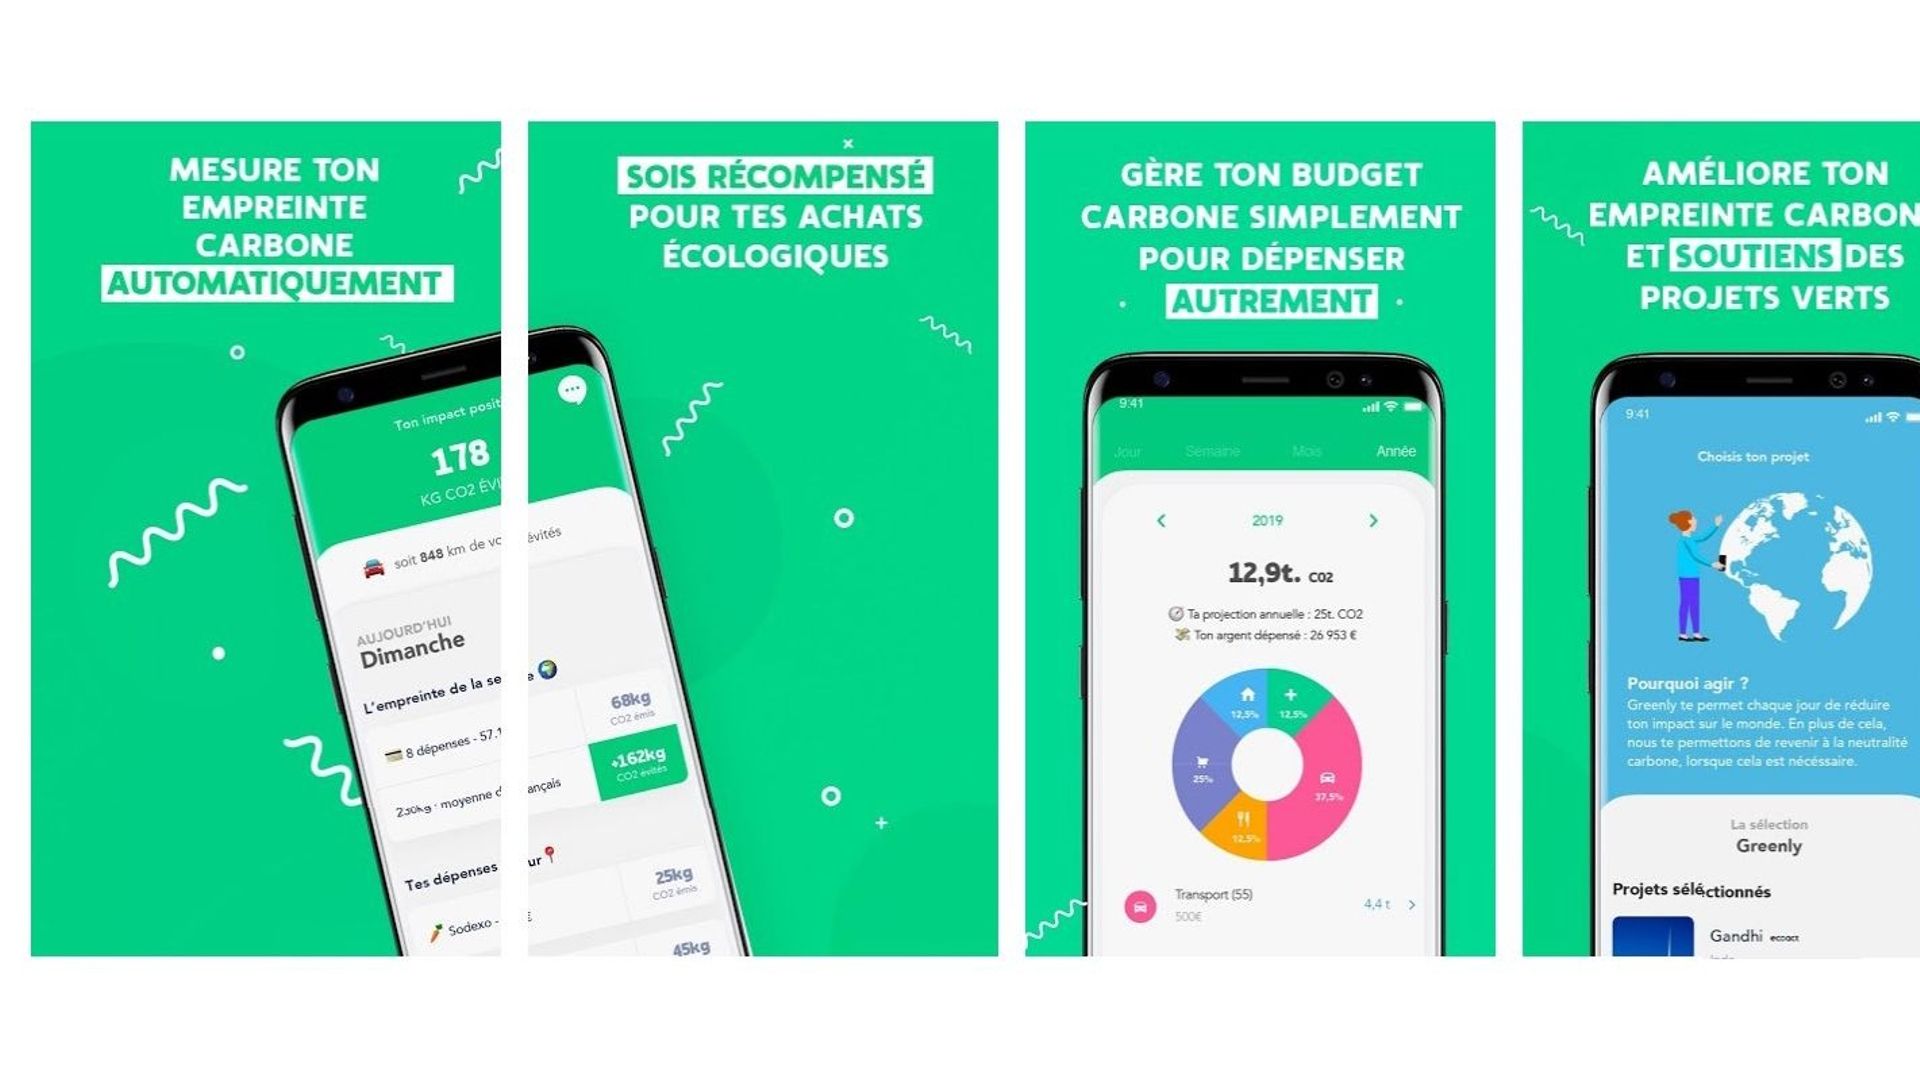 L'application Greenly sous Android